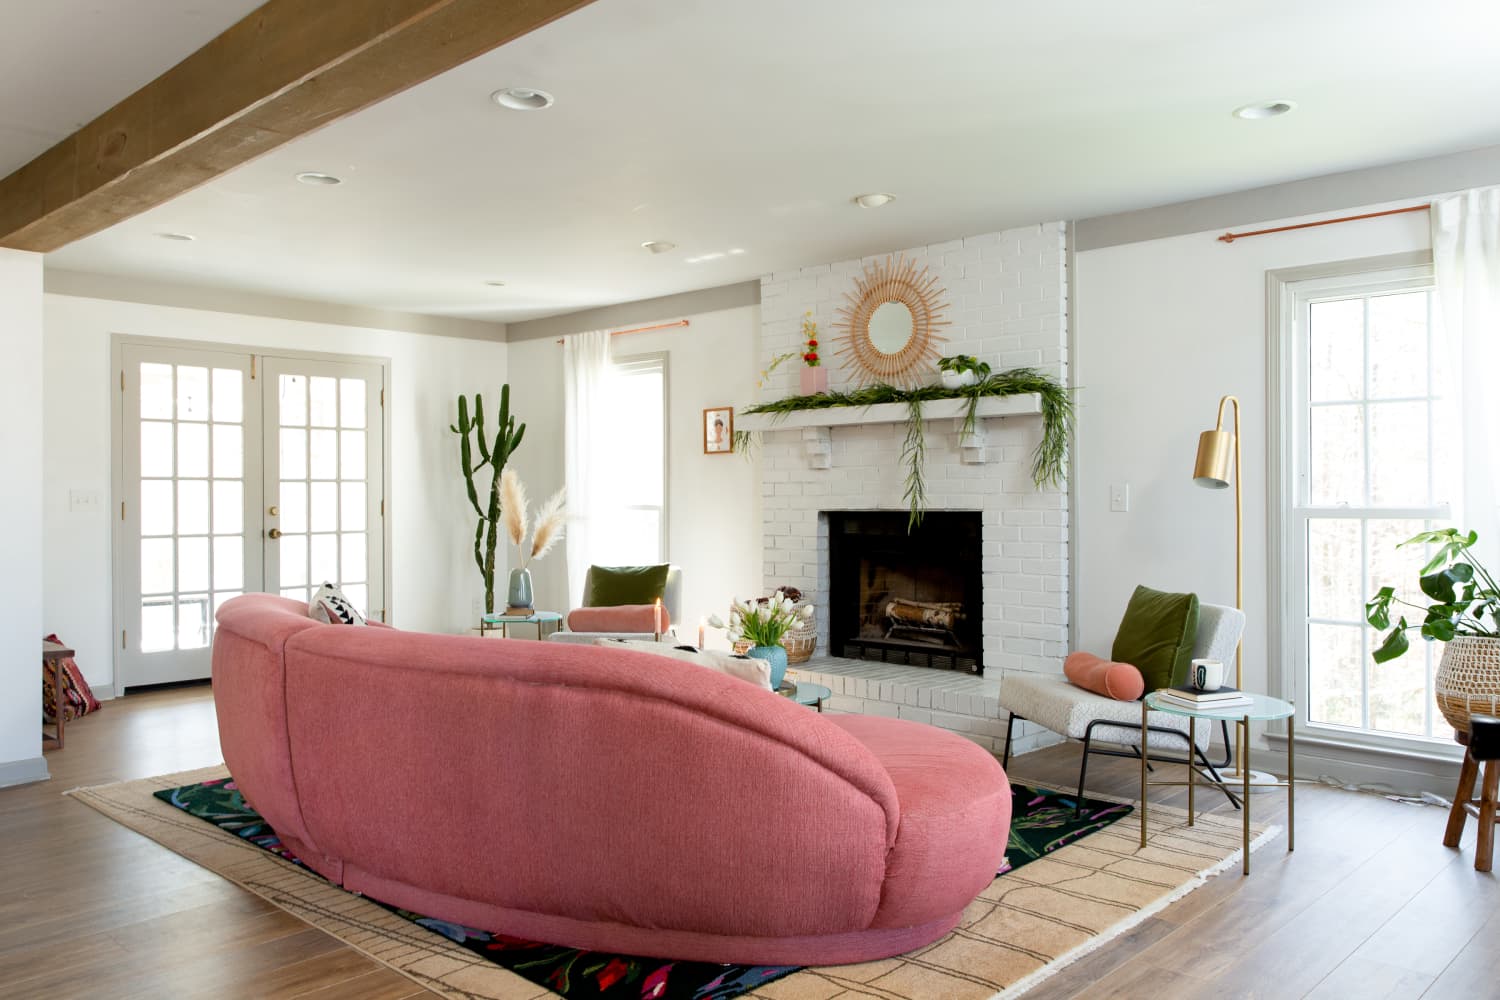 This Celeb-Approved Sofa Shape Is Growing in Popularity